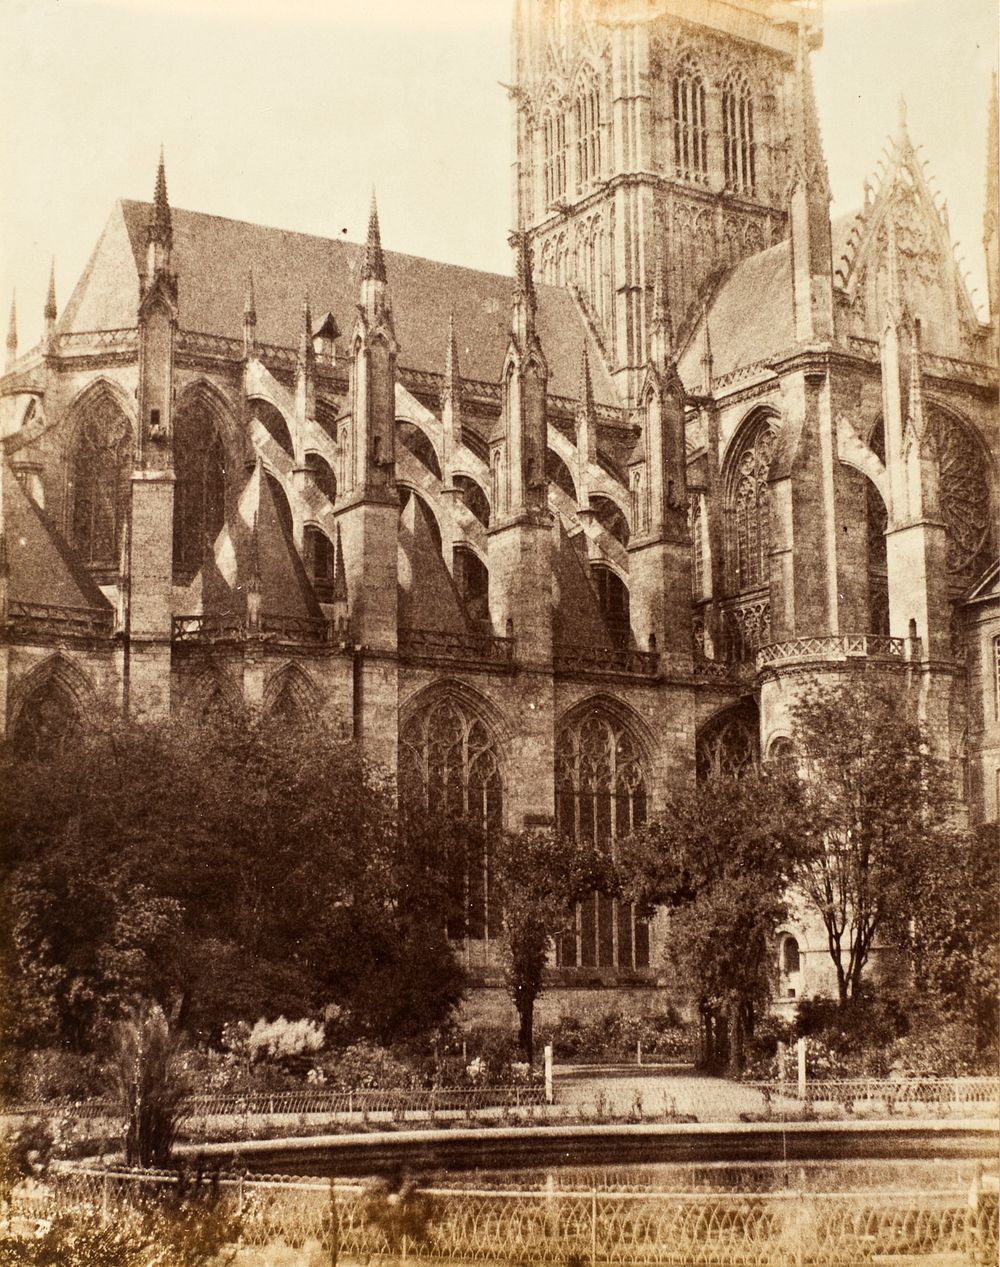 St. Oven, Rouen by Alfred Capel Cure